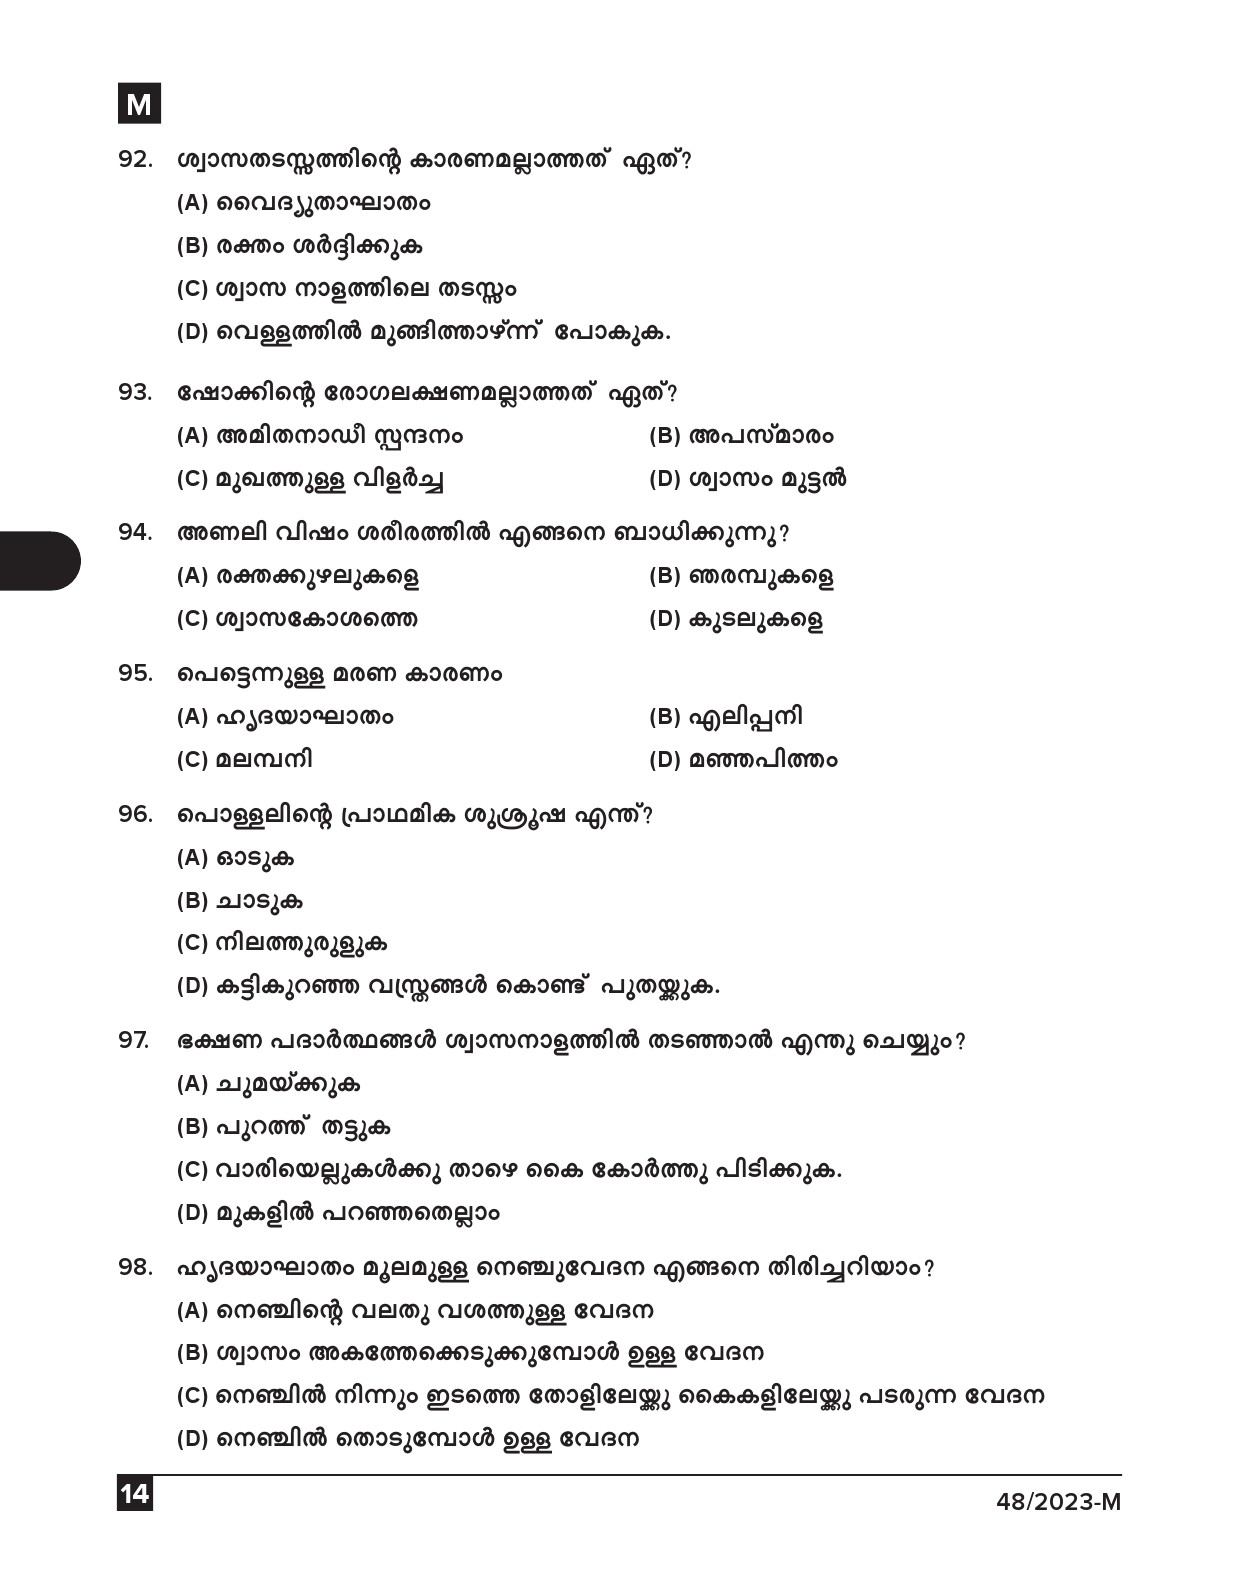 KPSC Fire and Rescue Officer Malayalam Exam 2023 Code 0482023 M 13